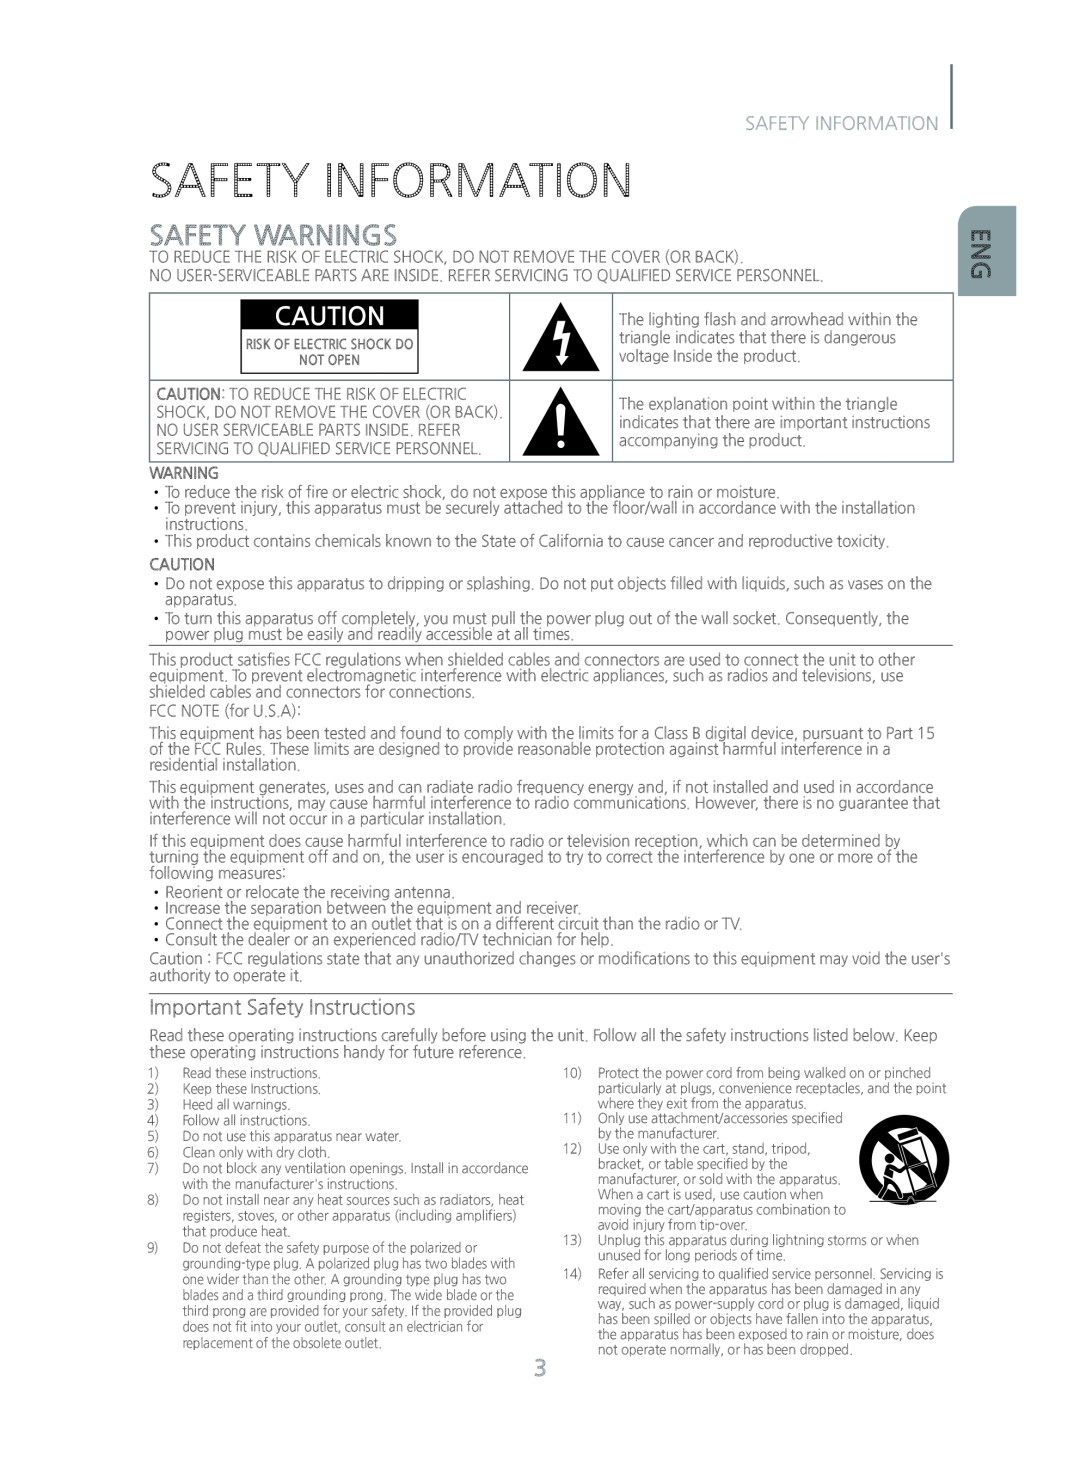 Samsung HW-H600/ZA manual Safety Information, Safety Warnings, Important Safety Instructions 